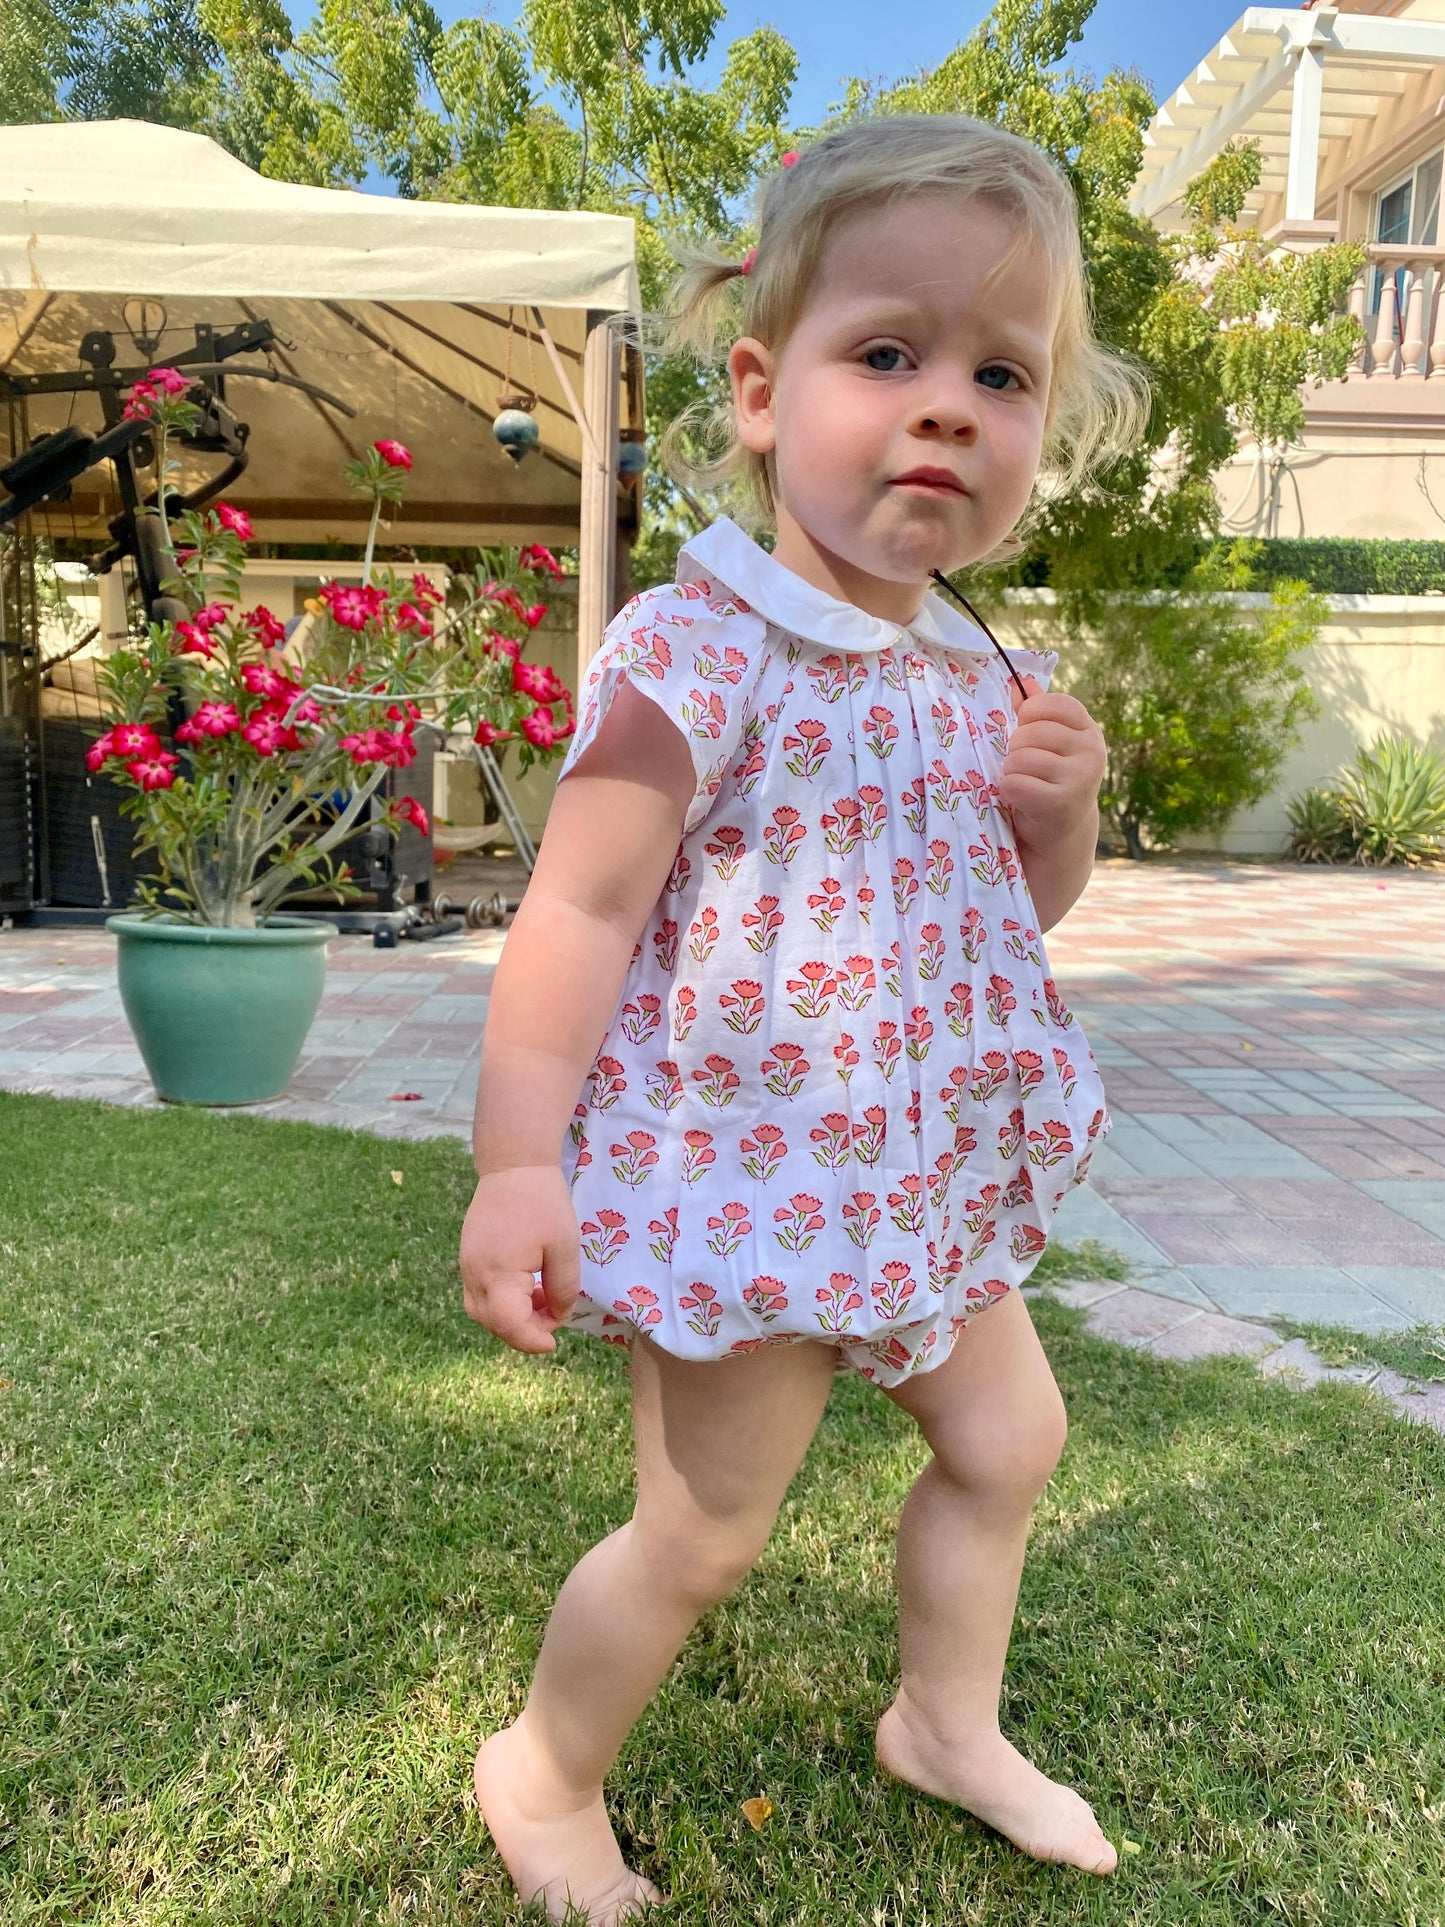 Load image into Gallery viewer, Pink Floral Romper
